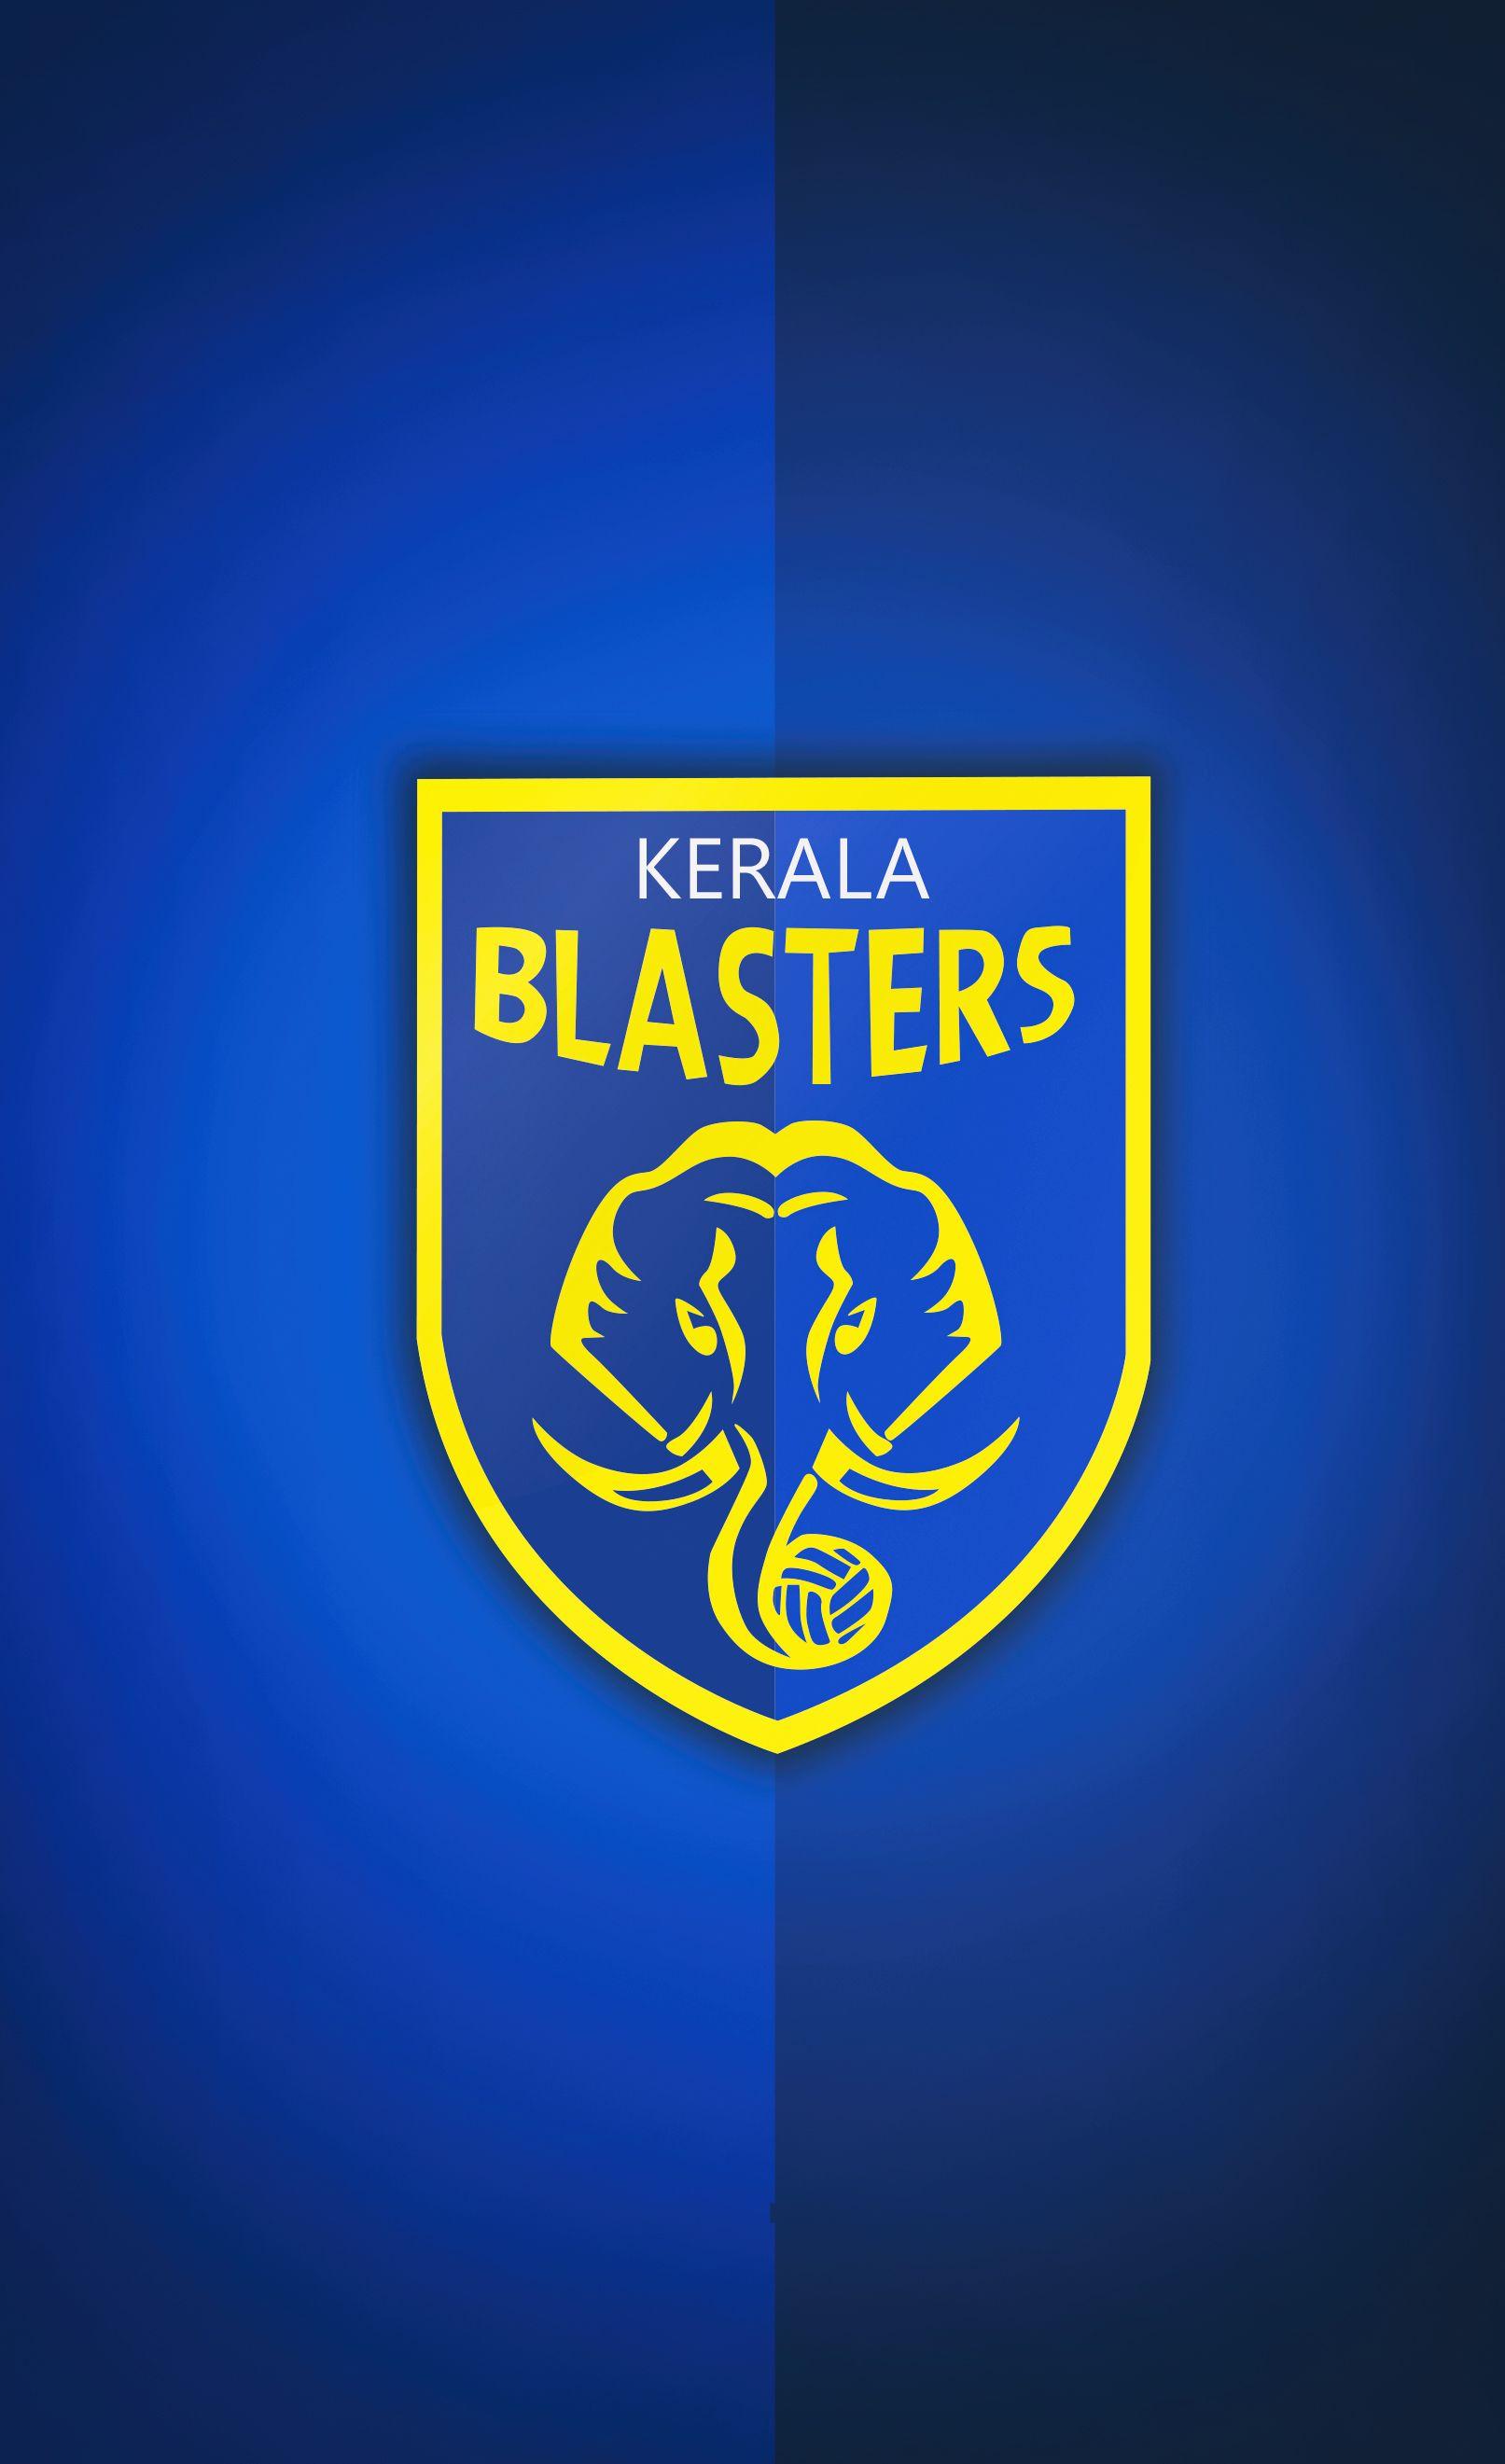 Kerala Blasters. Ideas for the House